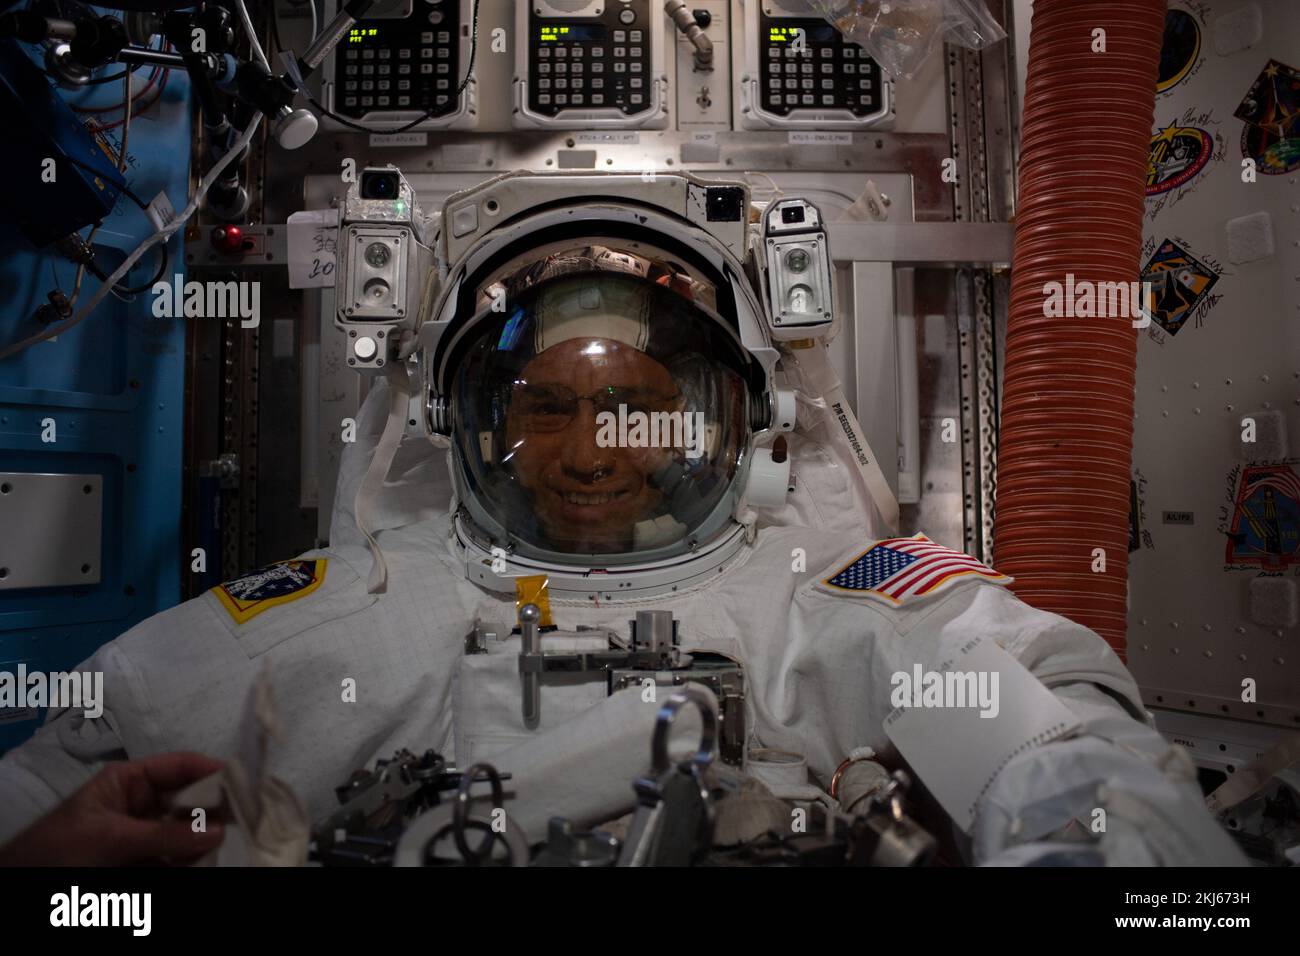 International Space Station, Earth Orbit. 15 November, 2022. NASA astronaut and Expedition 68 Flight Engineer Frank Rubio inside the Quest airlock after returning from a spacewalk outside the International Space Station, November 15, 2022 in Earth Orbit. The 7 hours and 11 minute spacewalk to assemble a mounting bracket was the first for Rubio and fellow astronaut Josh Cassada.  Credit: Josh Cassada/NASA/Alamy Live News Stock Photo